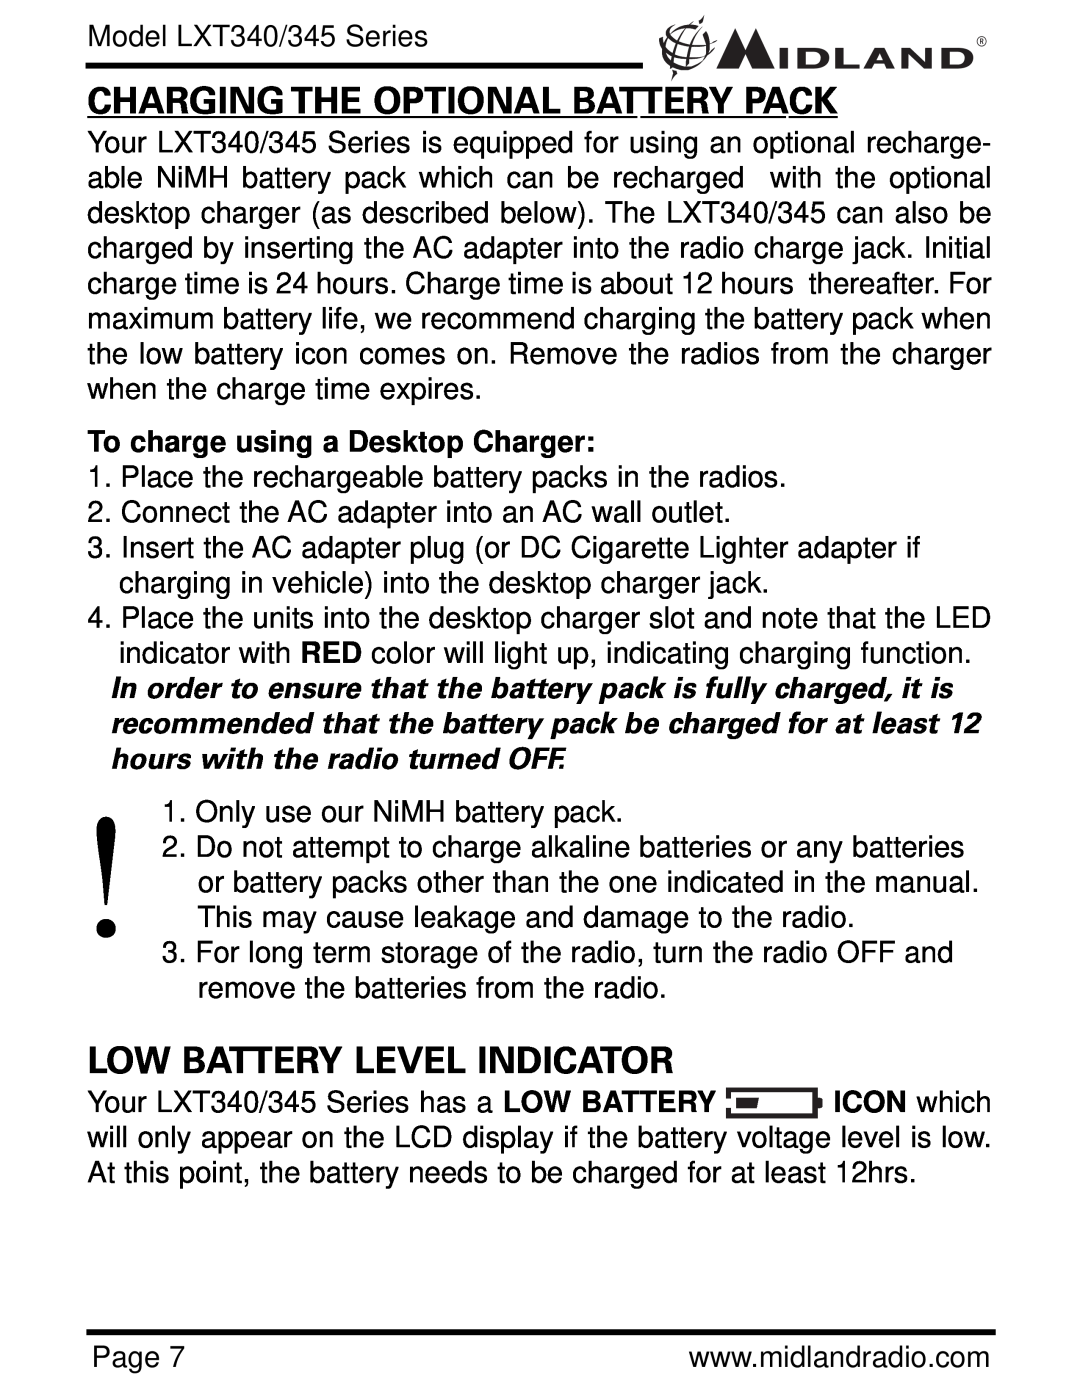 Midland Radio LXT345 Series Charging The Optional Battery Pack, Low Battery Level Indicator, Model LXT340/345 Series 